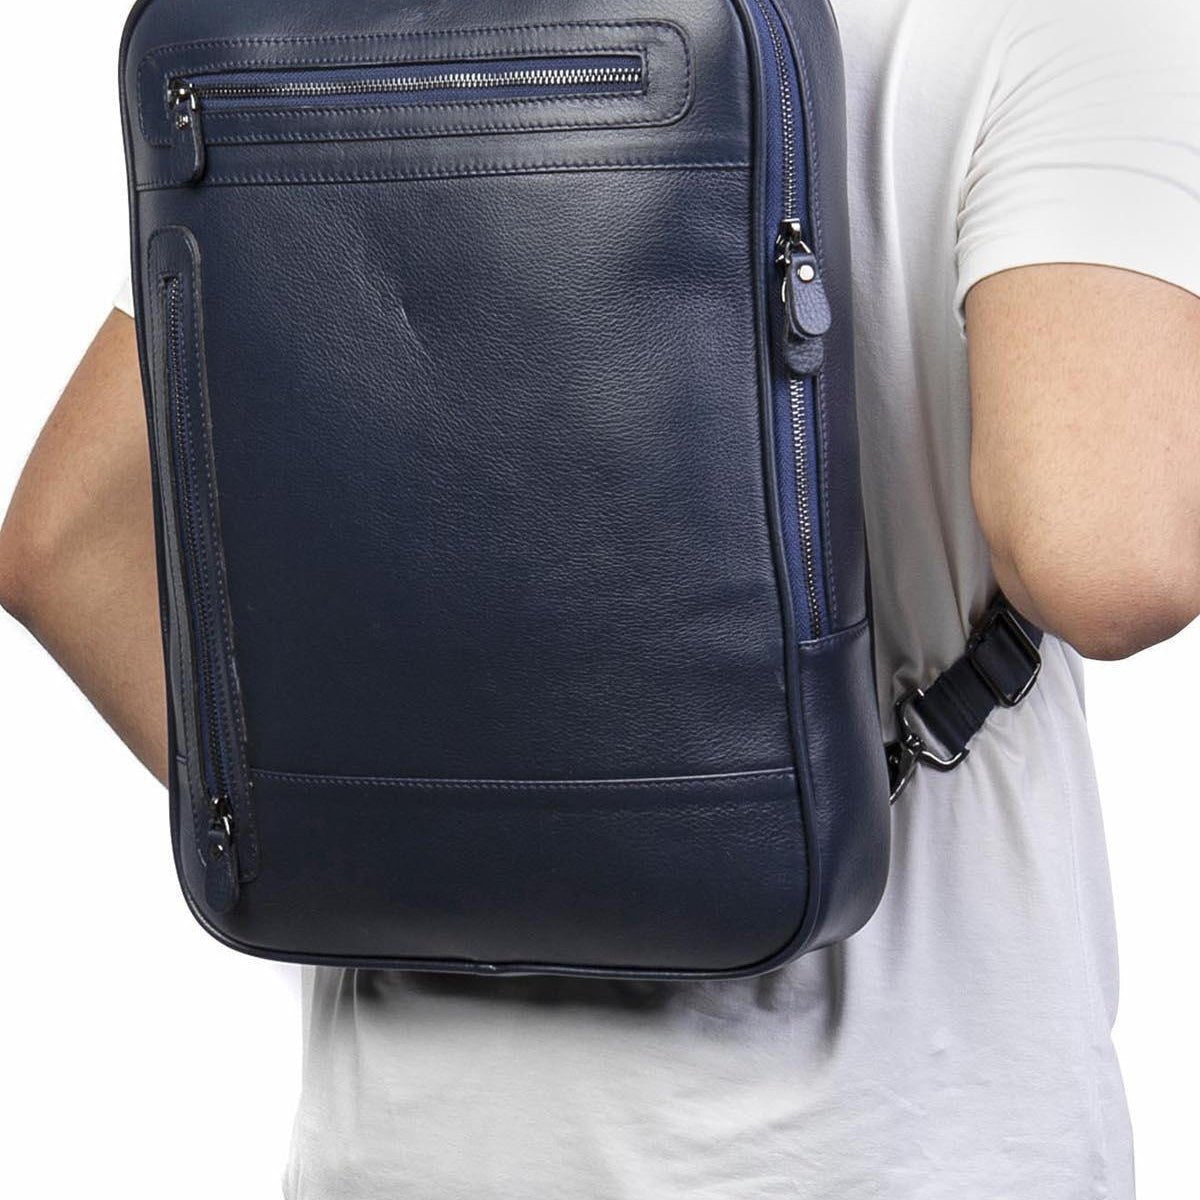 Convertible Laptop Backpack, Use as Laptop Bag, Full Leather, 3 Color Options  99percenthandmade Blue  